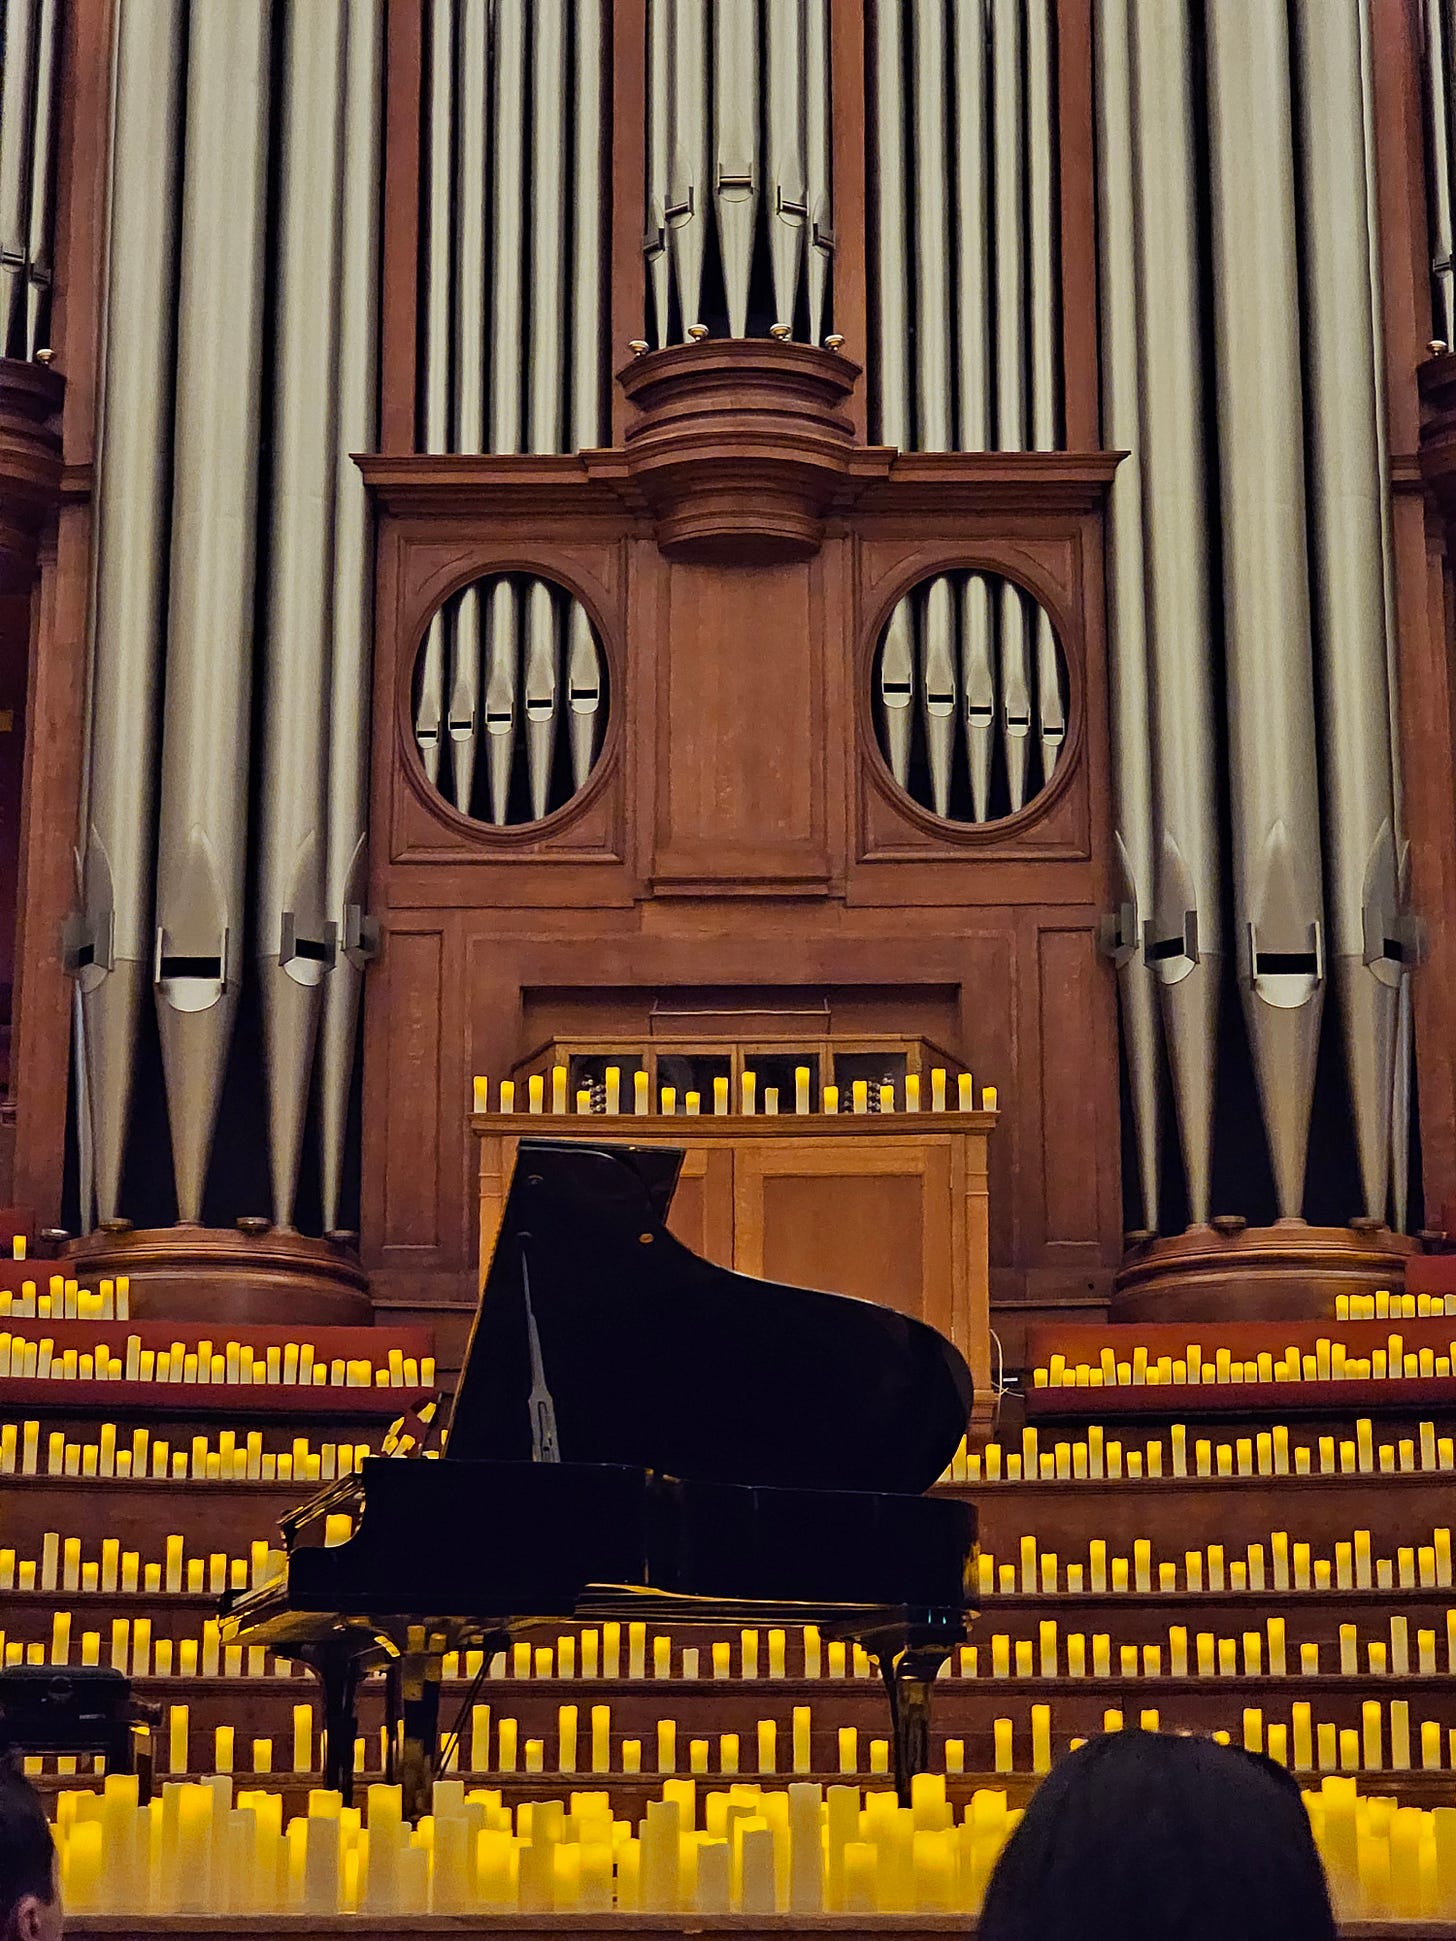 grand piano in front of a large pipe organ in a church